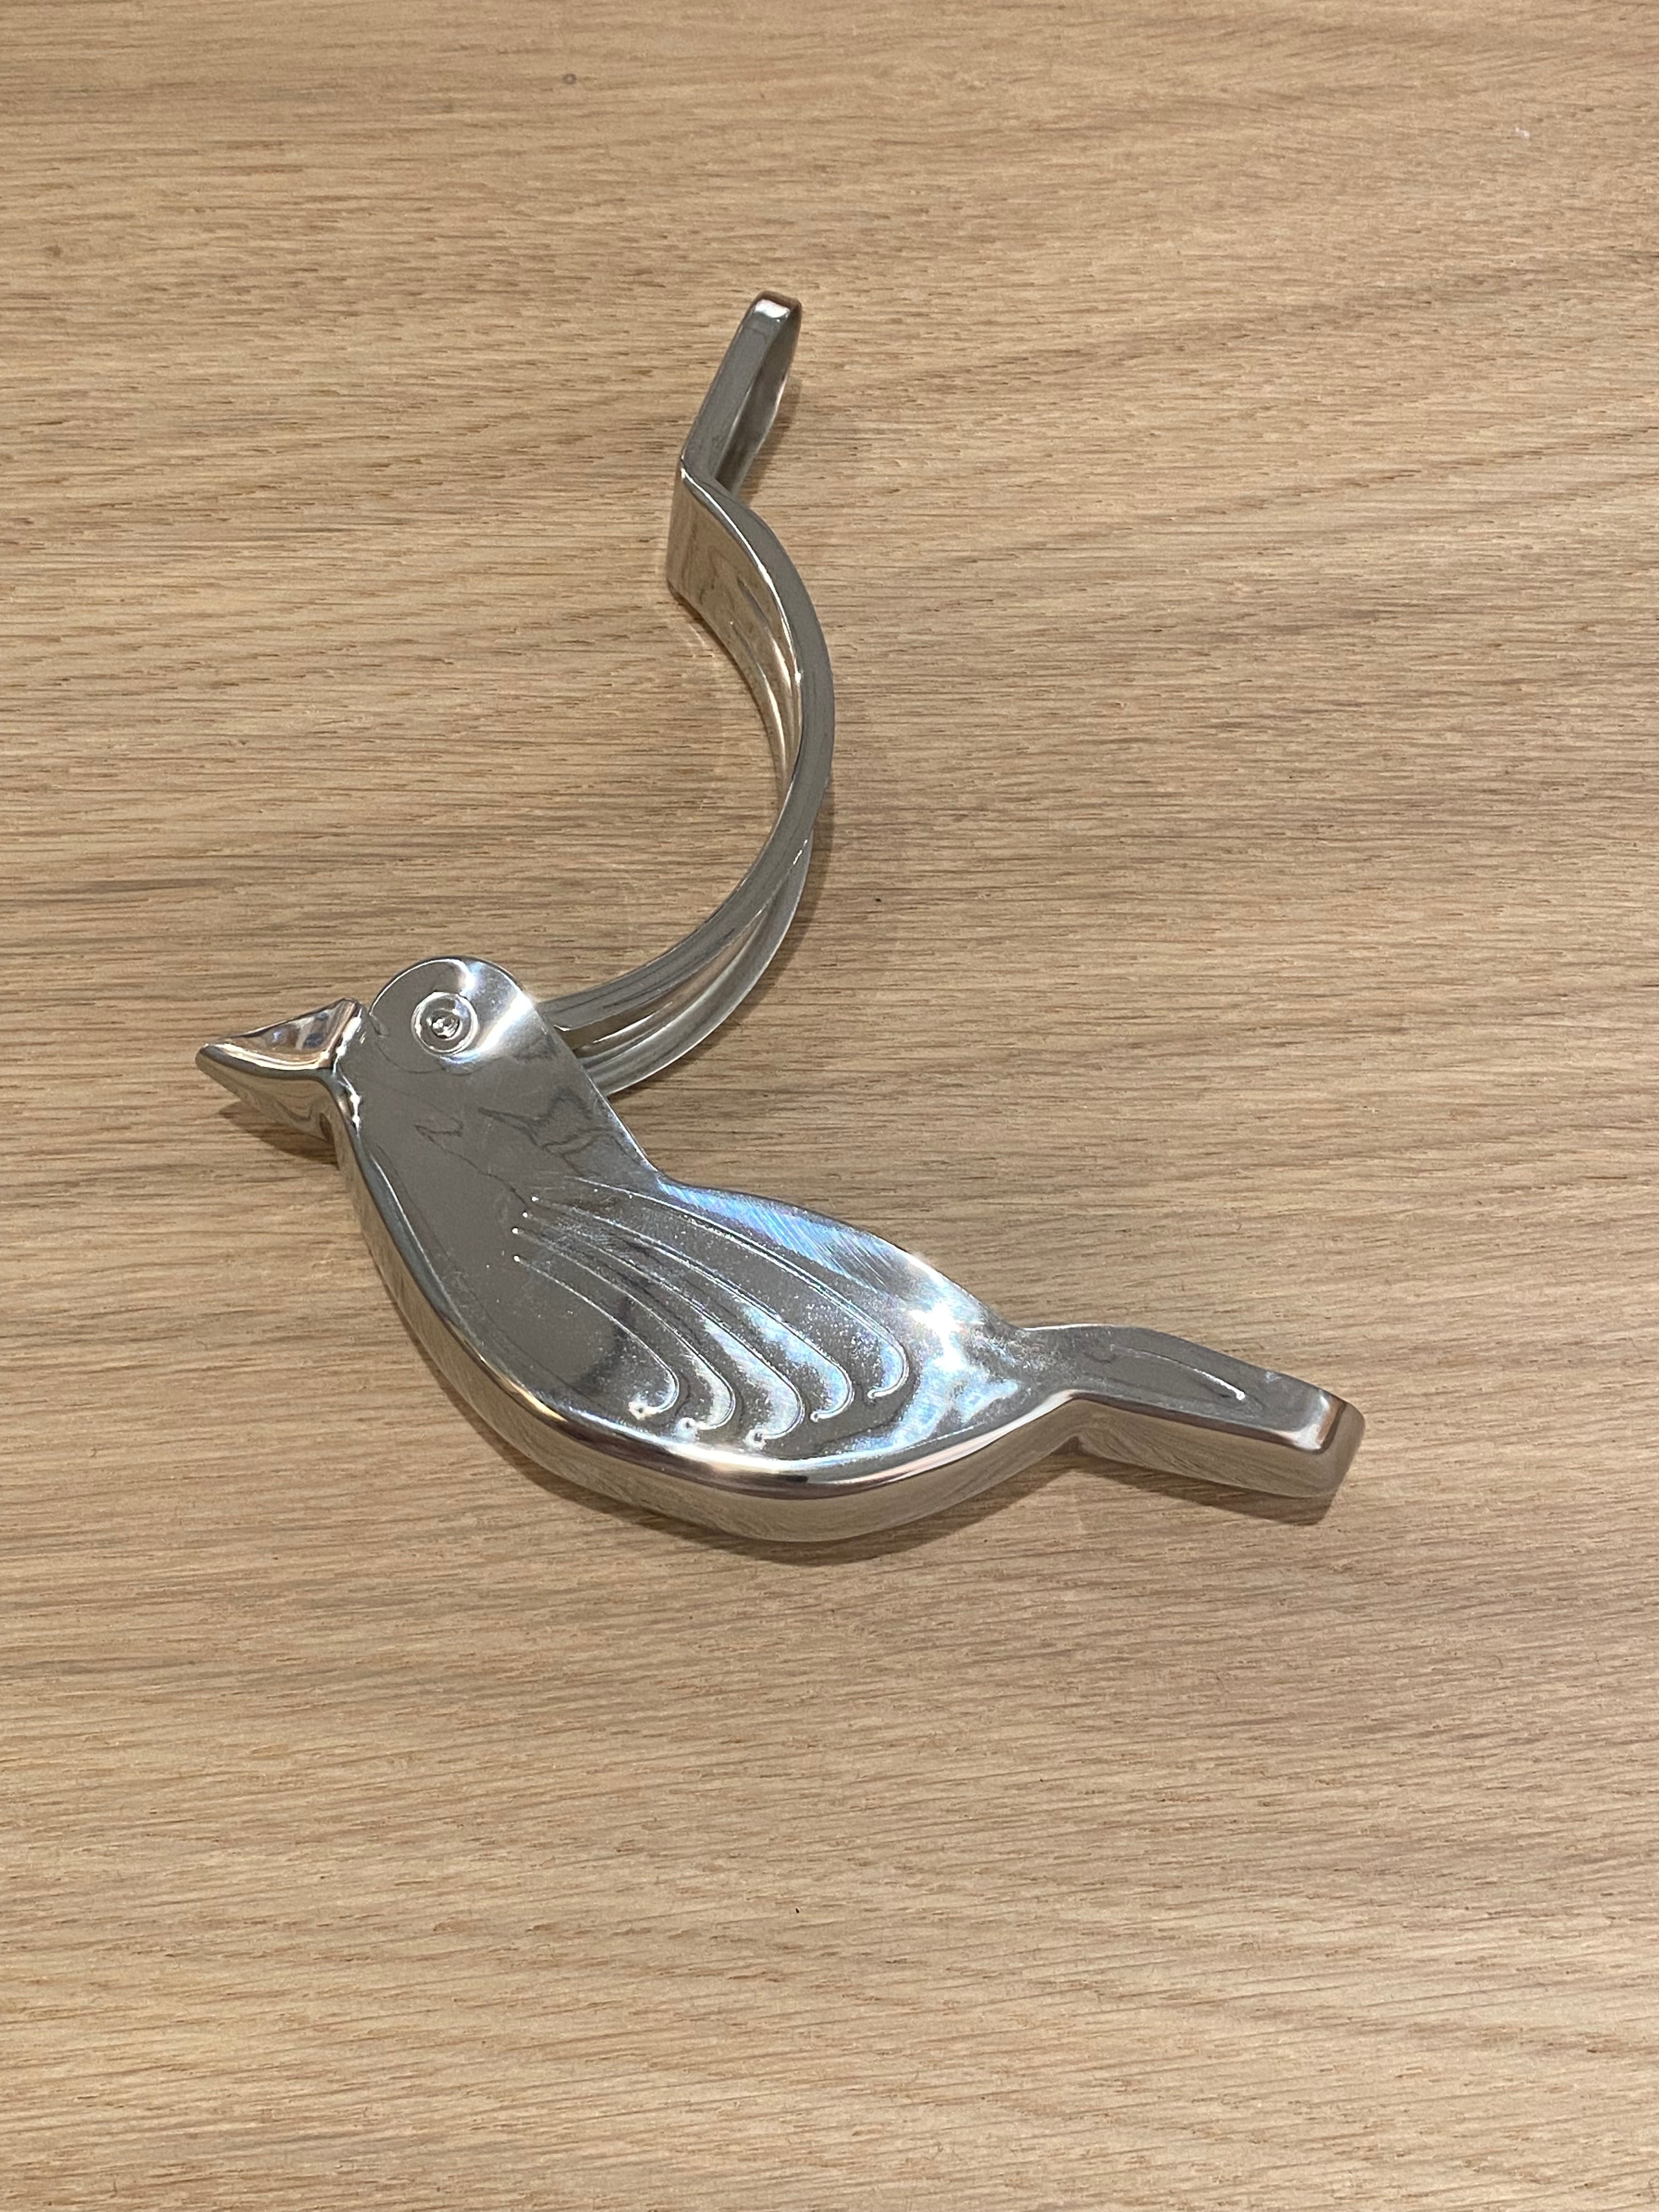 Citrus press in stainless steel with bird motif